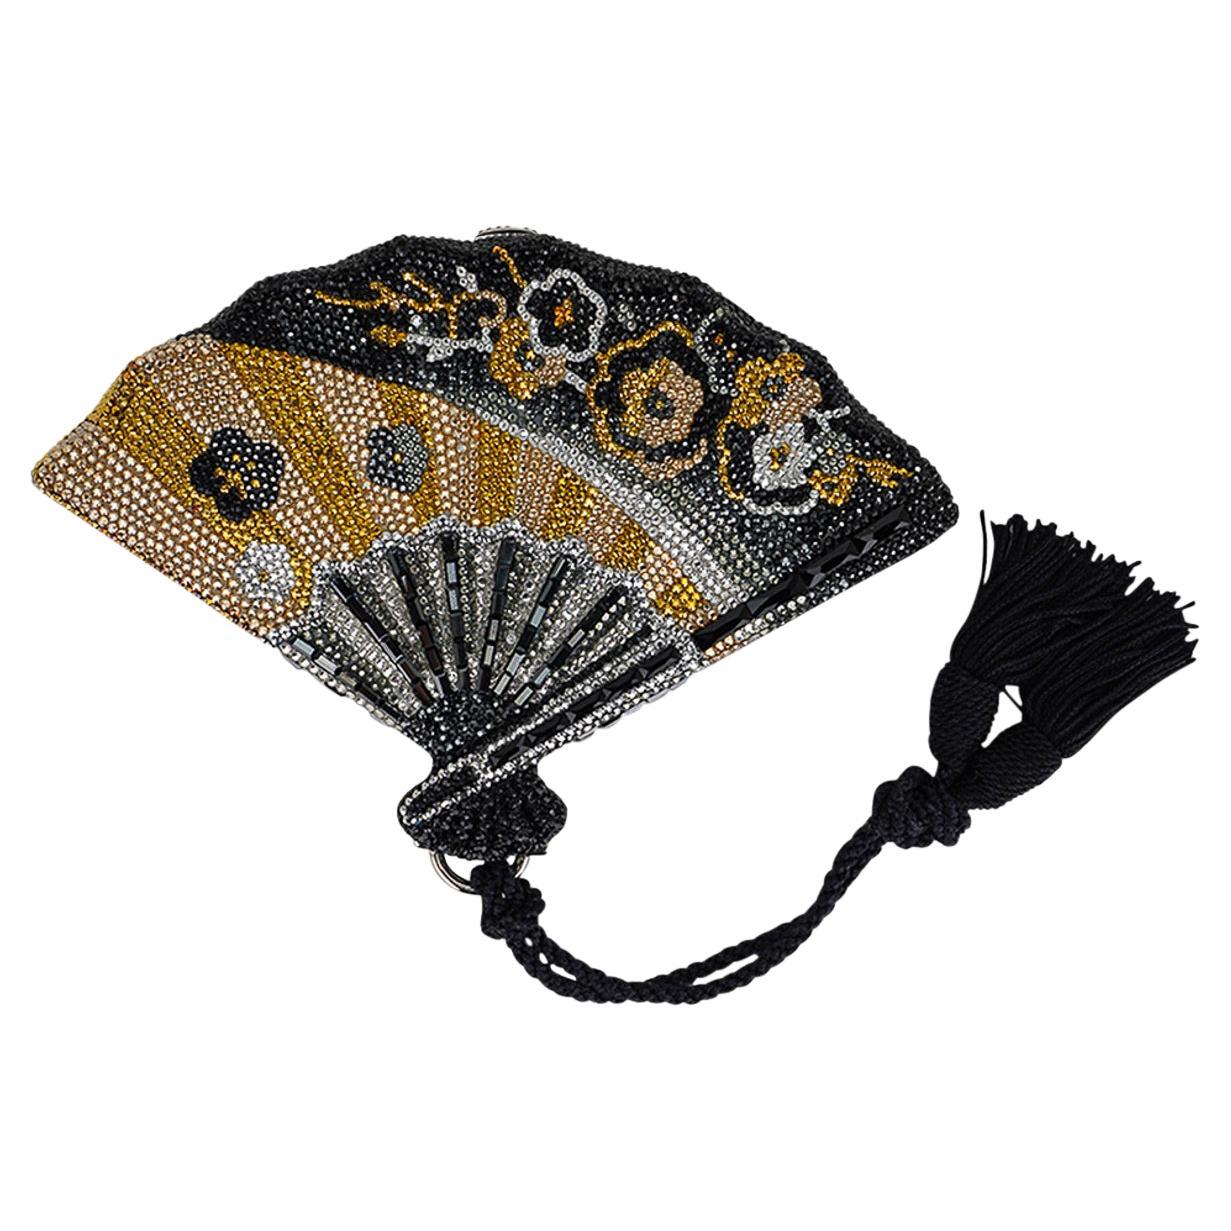 Judith Leiber Fan Minaudiere clutch bag featured in multicolored fine crystal.
Beautifully designed as Geisha fan, the bag has hand placed Swarovki Crystals in black, gold and silver.
The front and rear have a floral design at the top.
The